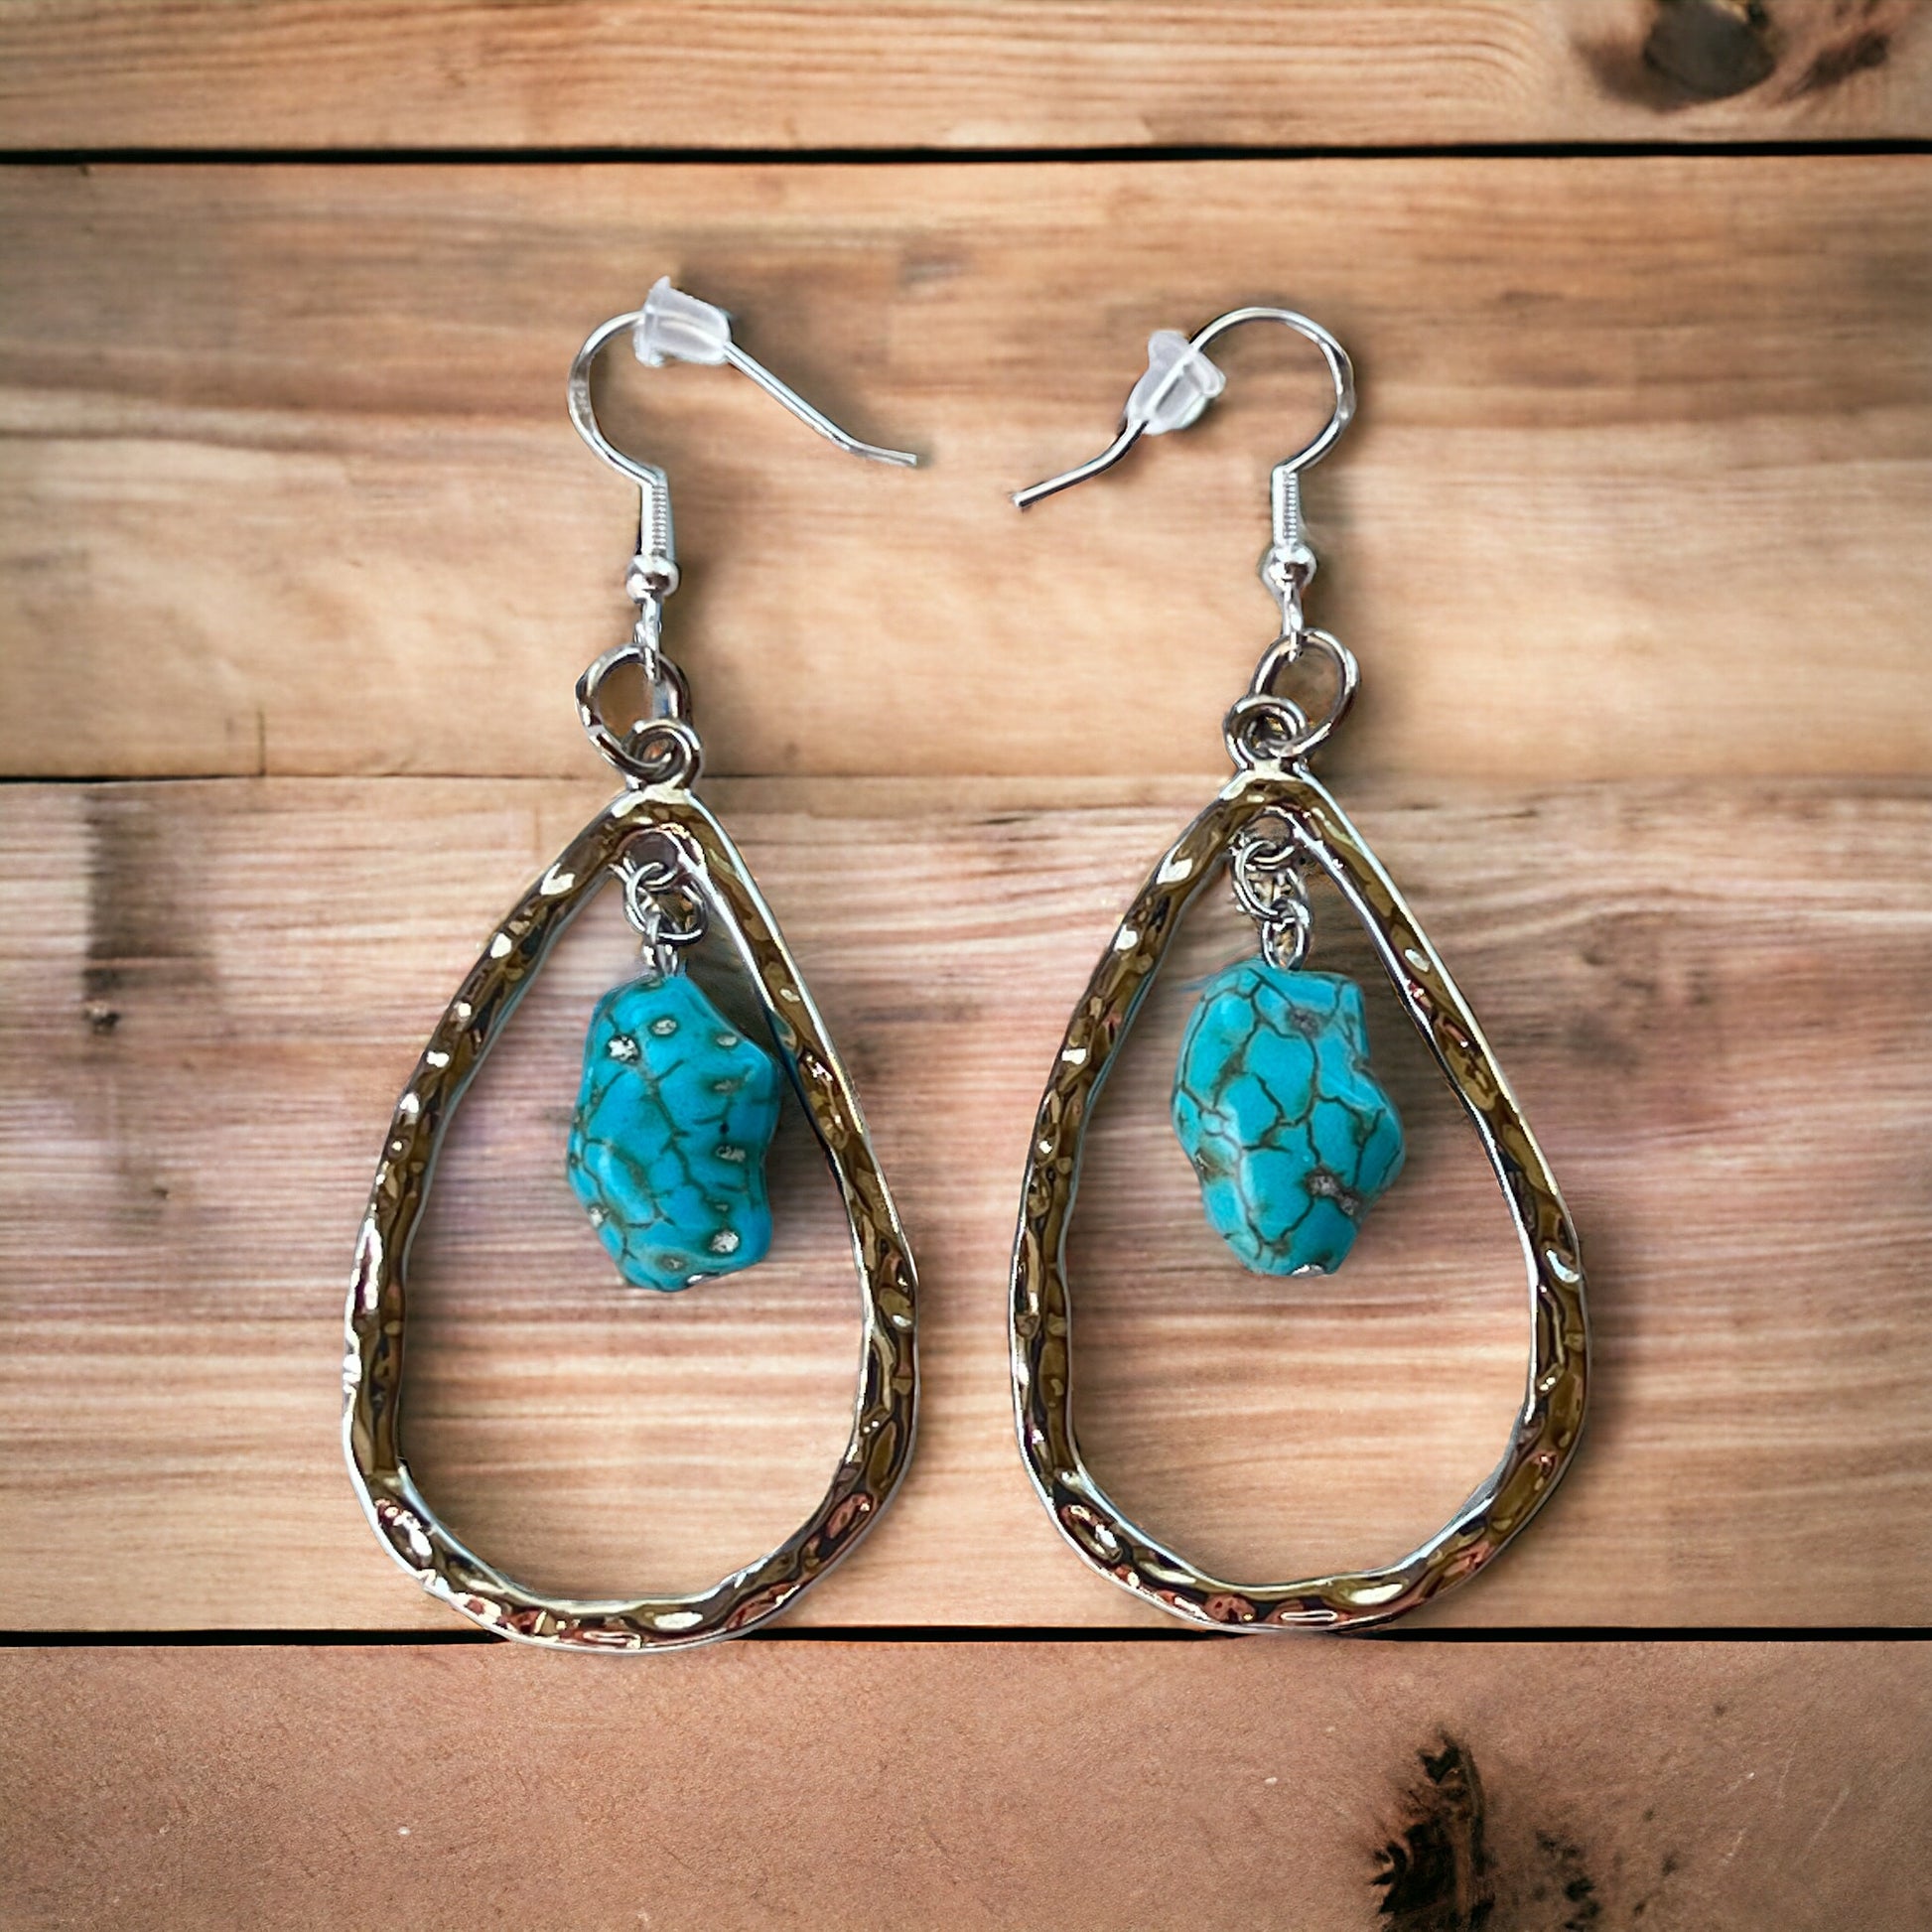 Silver Toned Hammered Metal Teardrop Earrings with Synthetic Turquoise Stone Boho Chic Statement Jewelry Country Western Earrings for Women